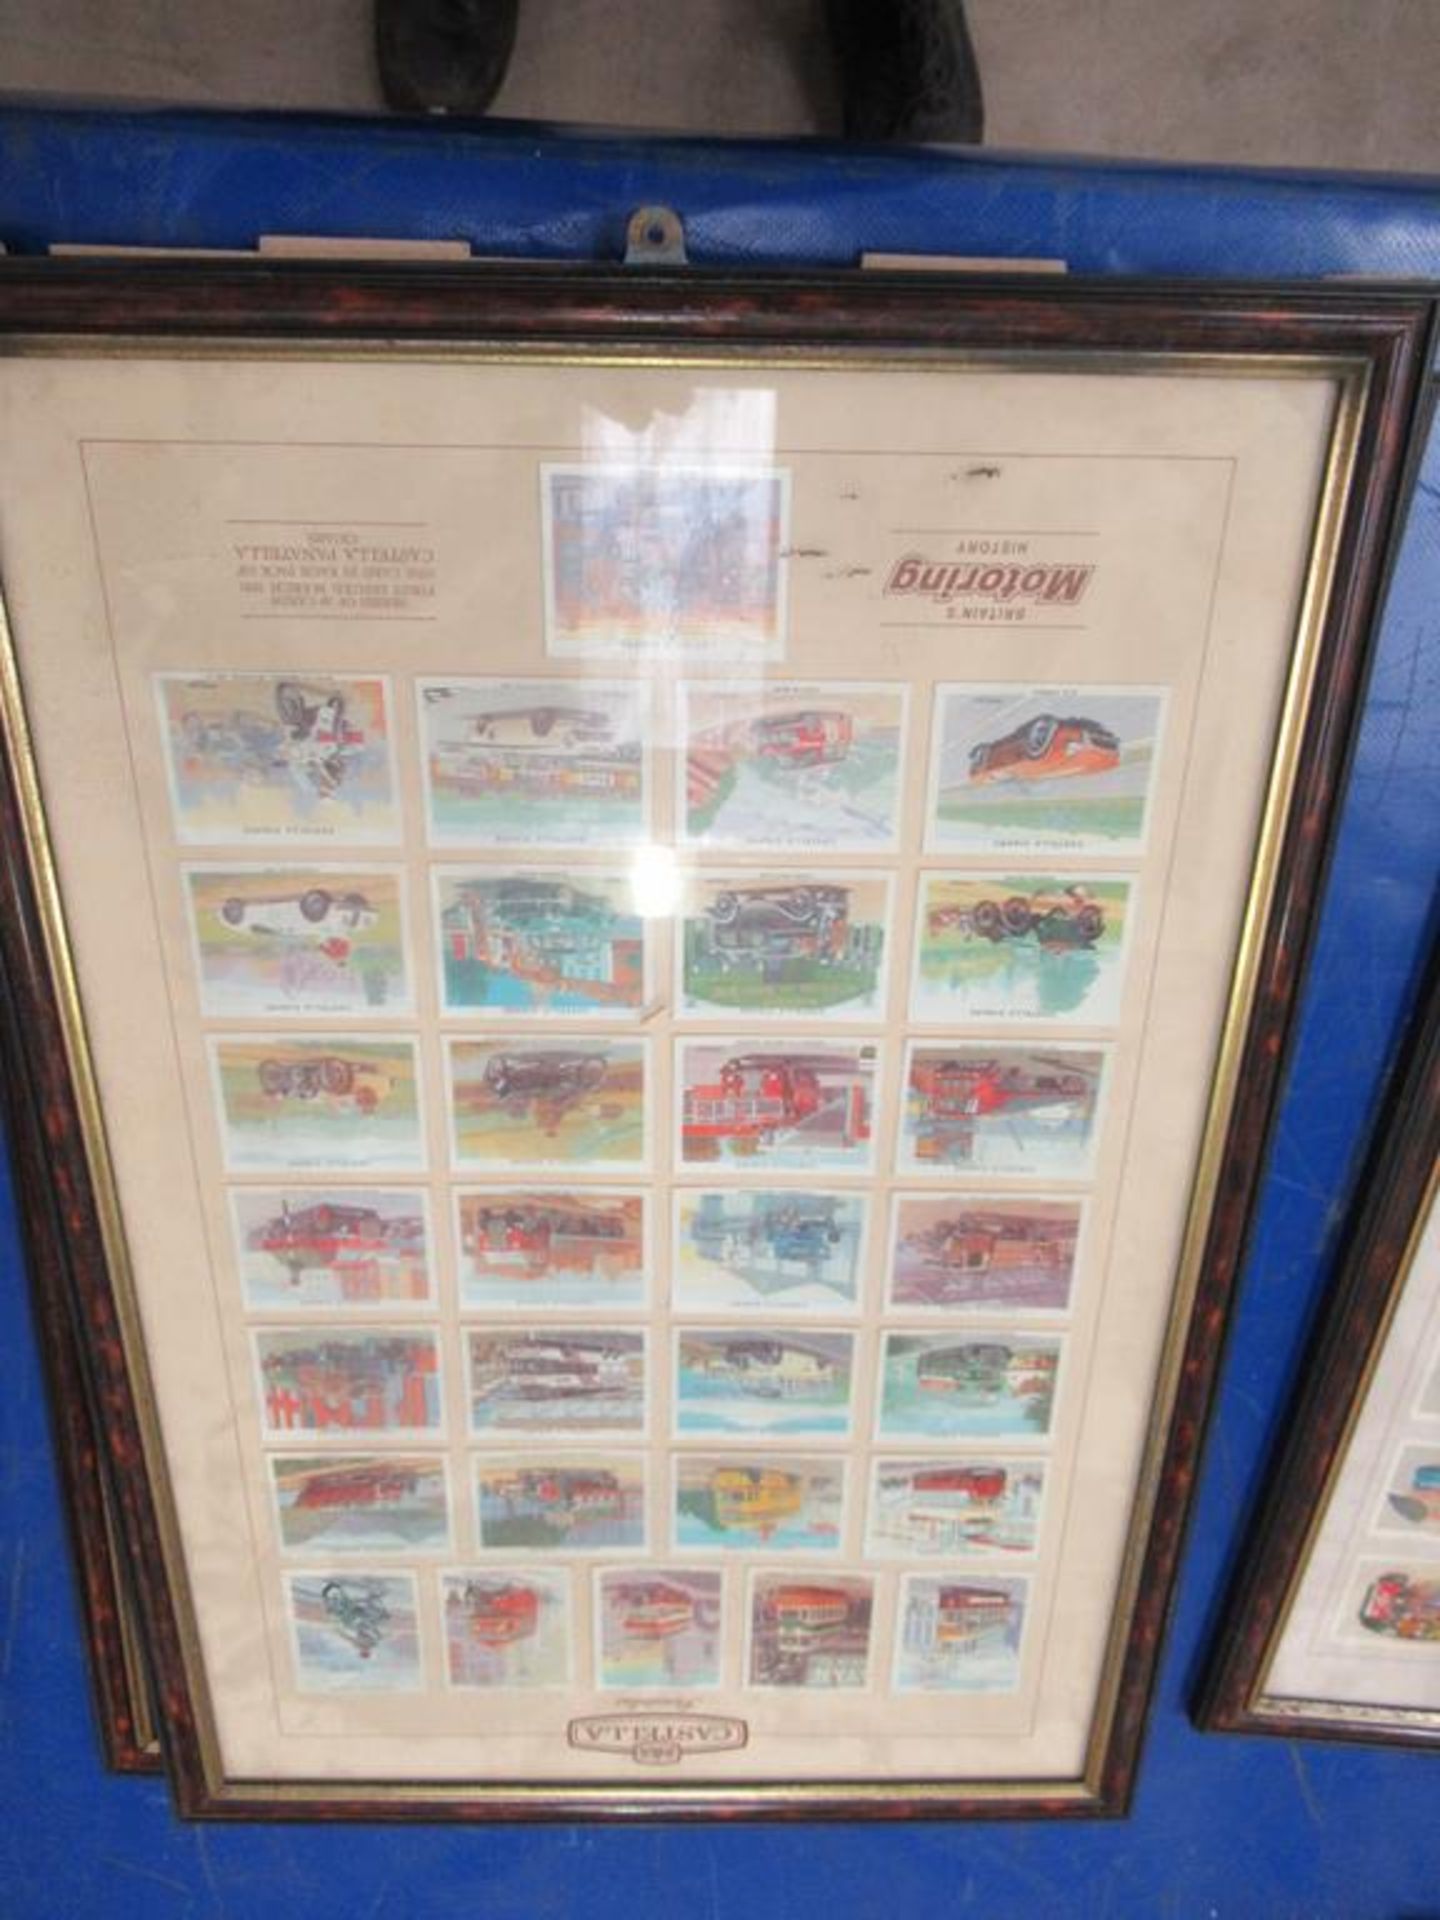 4 x Castella Panatellas framed cigar card collections to include racing cars and aeroplanes etc. - Image 3 of 4